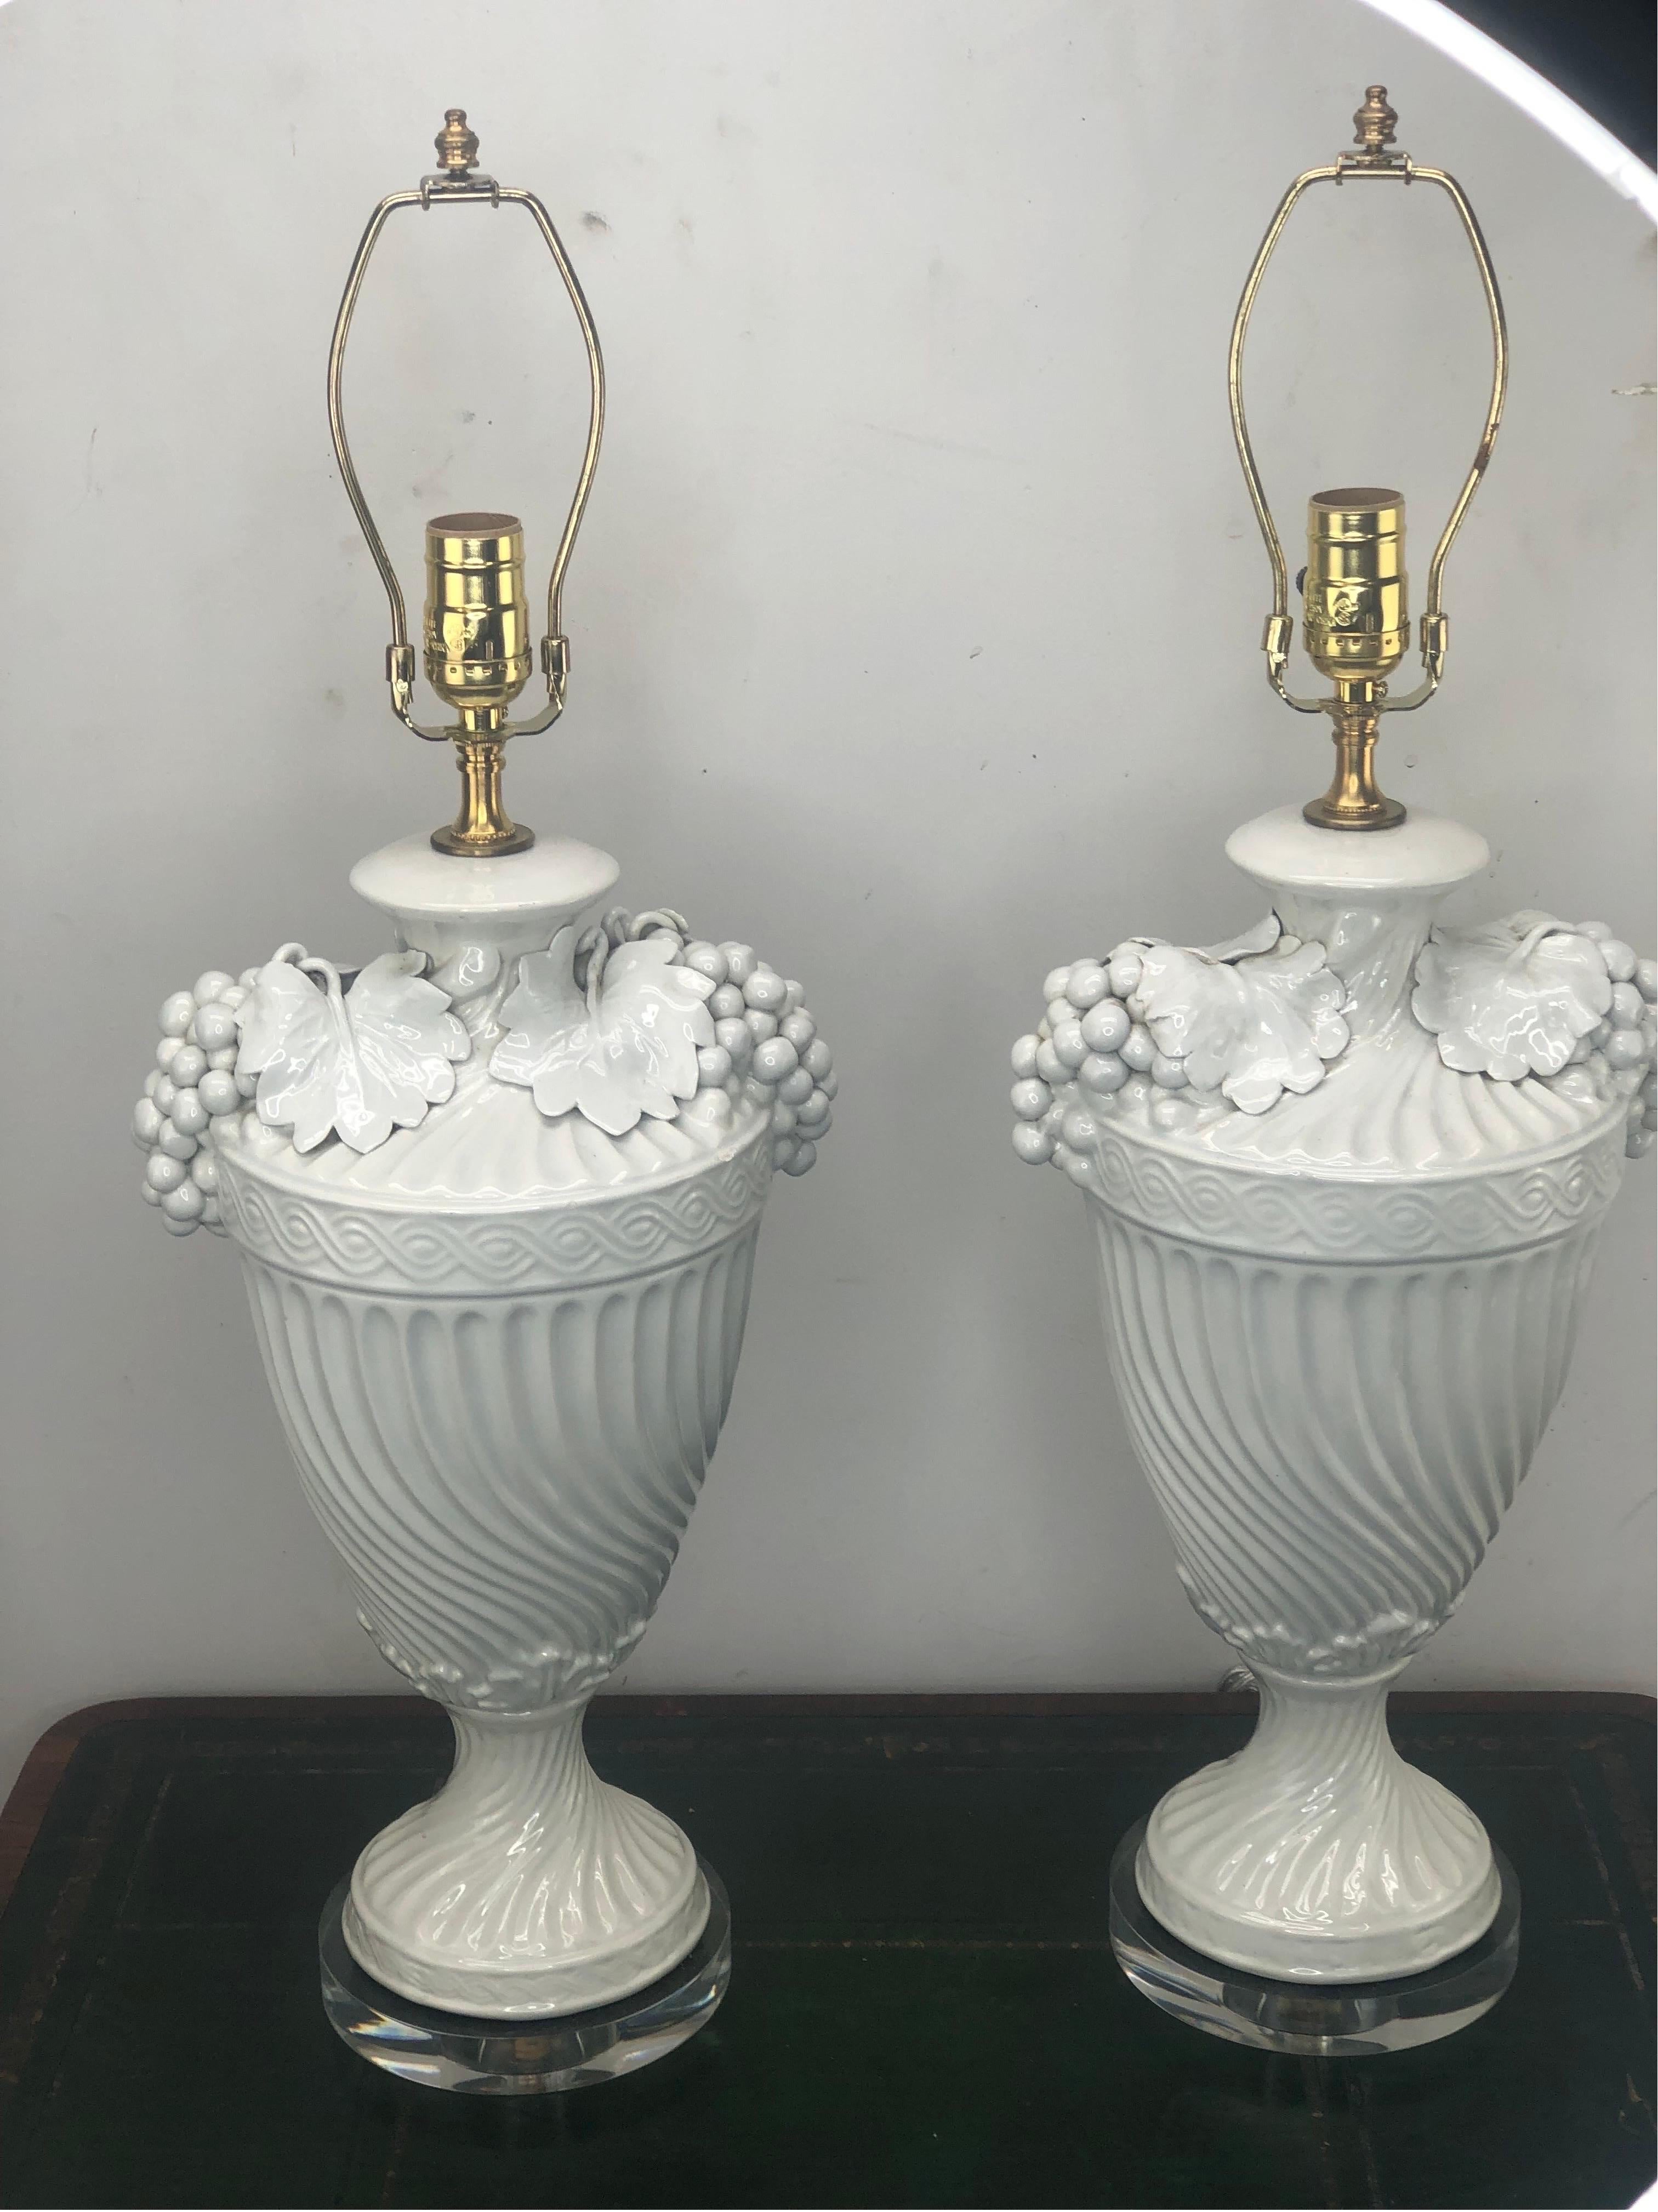 Pair of Vintage Italian Glazed Ceramic Urn Lamps With Grapes Clusters, mounted on lucite bases. Newly wired with 3-way socket.